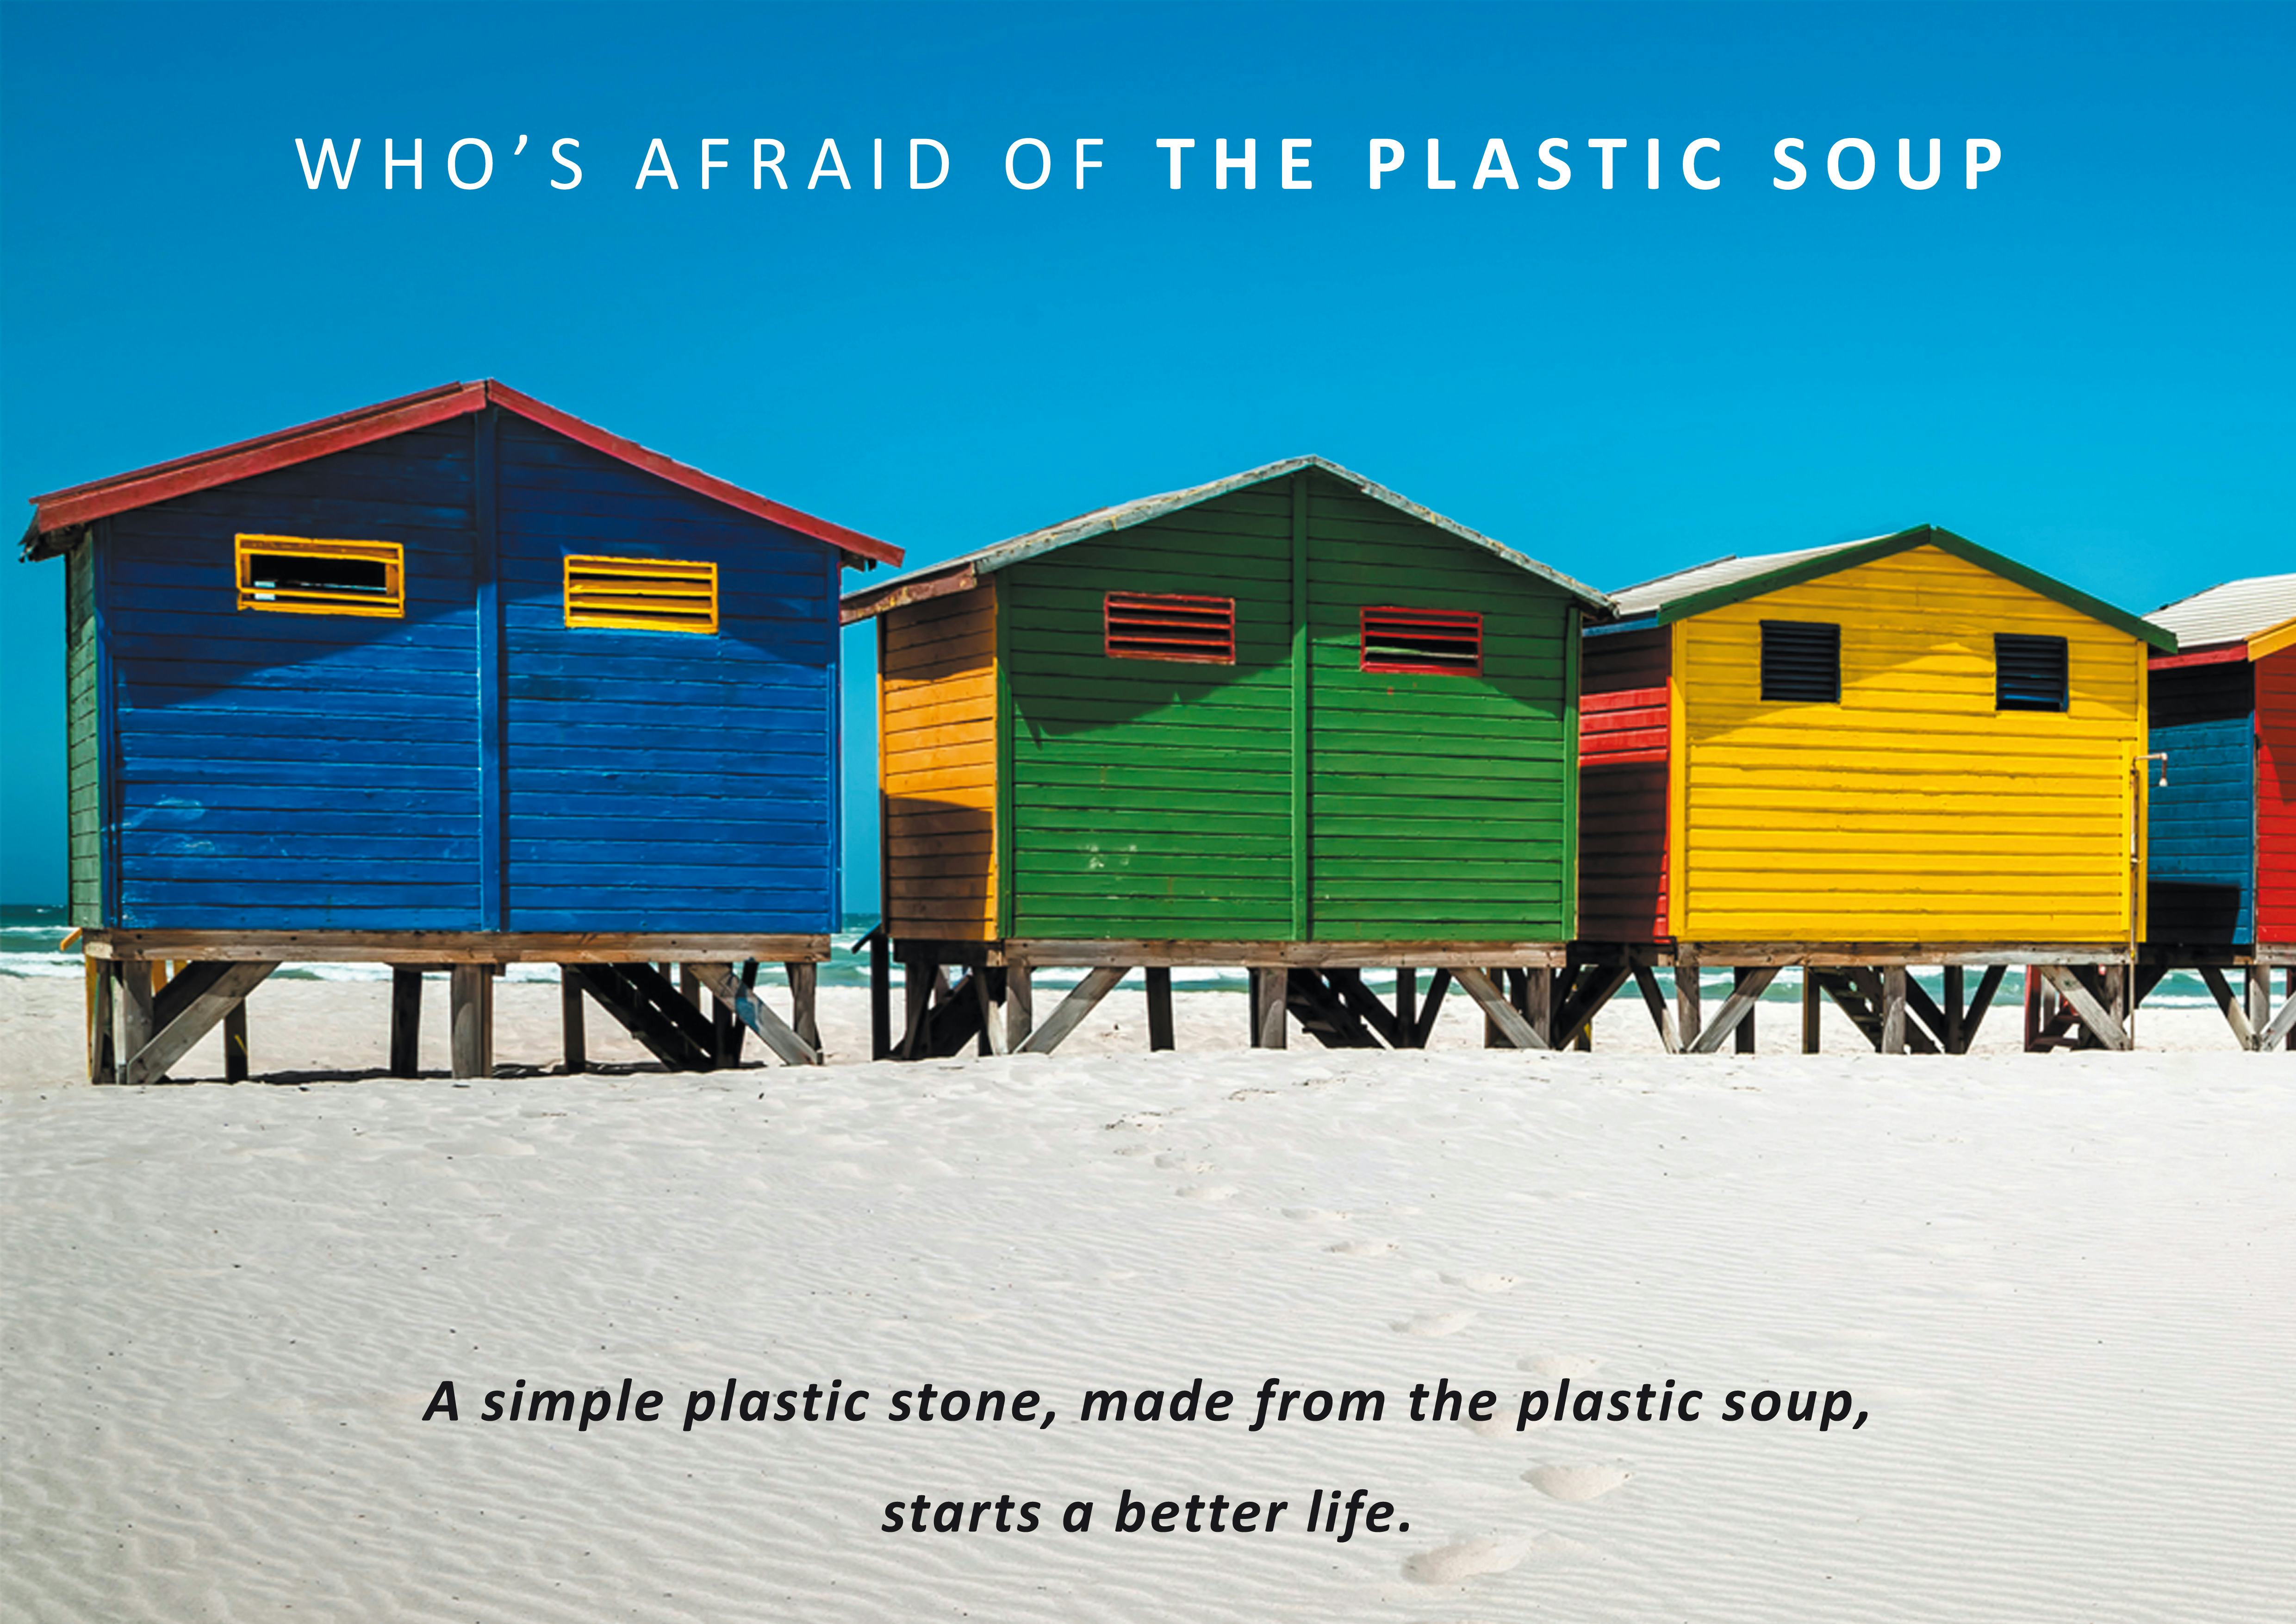 WHO’S AFRAID OF THE PLASTIC SOUP.